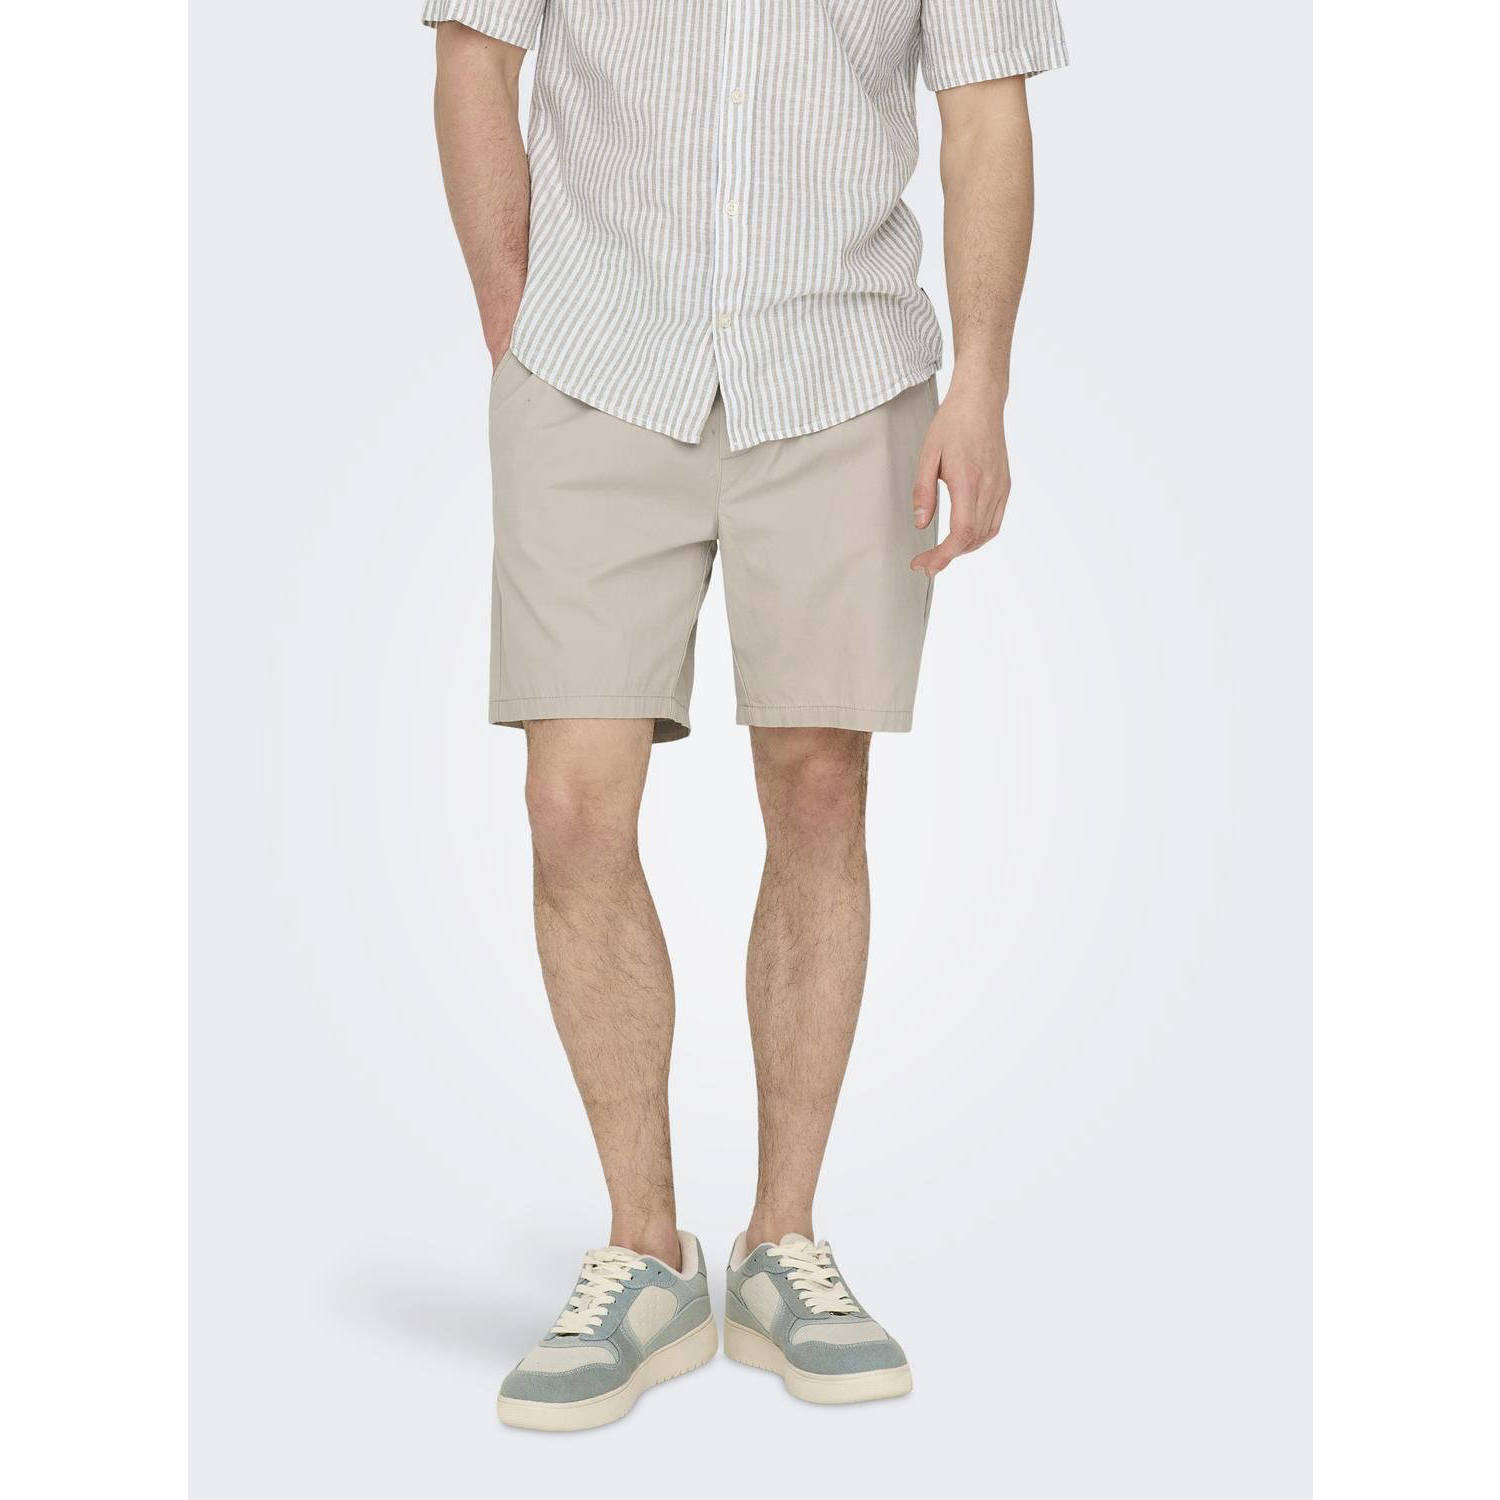 ONLY & SONS regular fit short silver lining